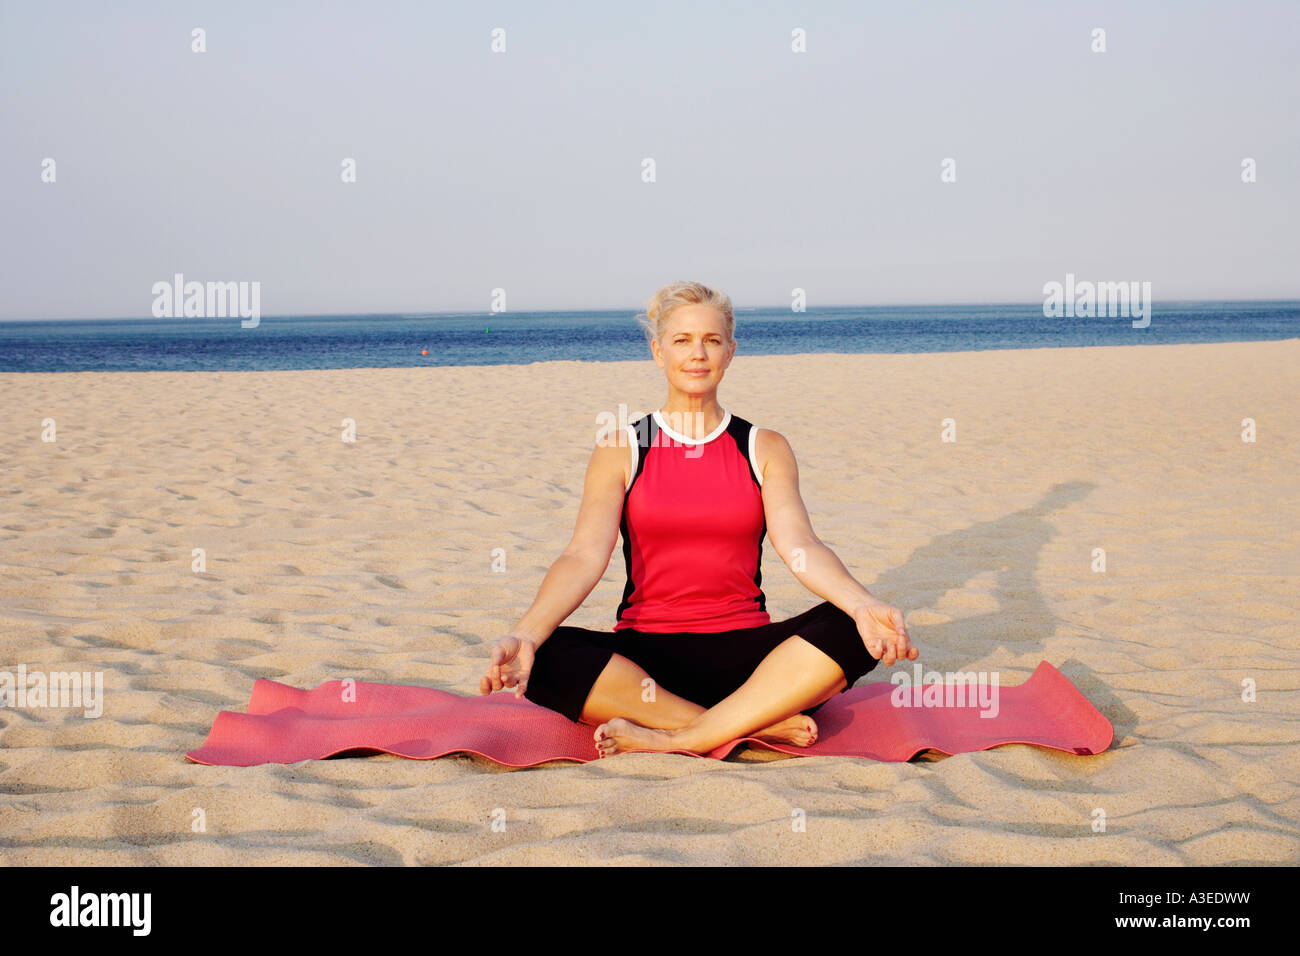 Portrait of a mature woman performing yoga on the beach Stock Photo